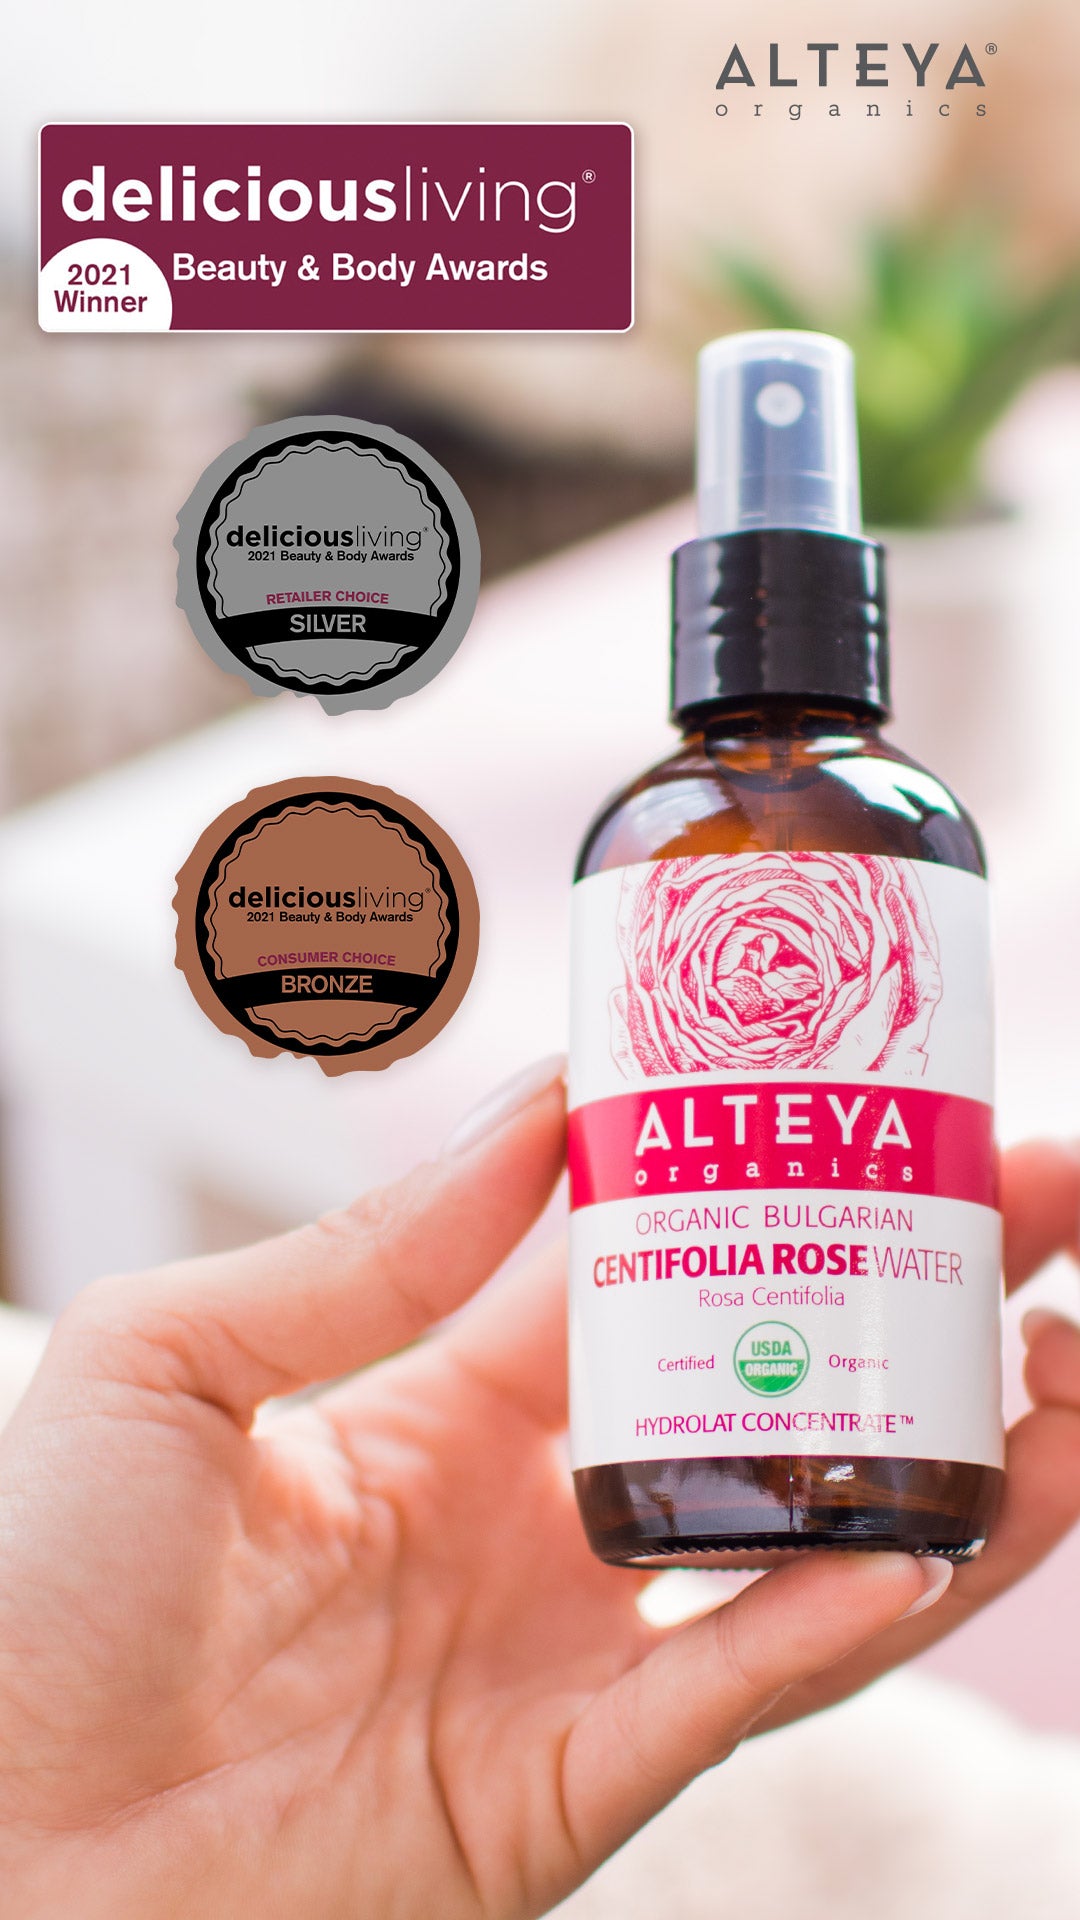 A hand holding a bottle of Alteya's concilia rose facial mist, infused with the essence of Bulgarian Rosa Damascena.